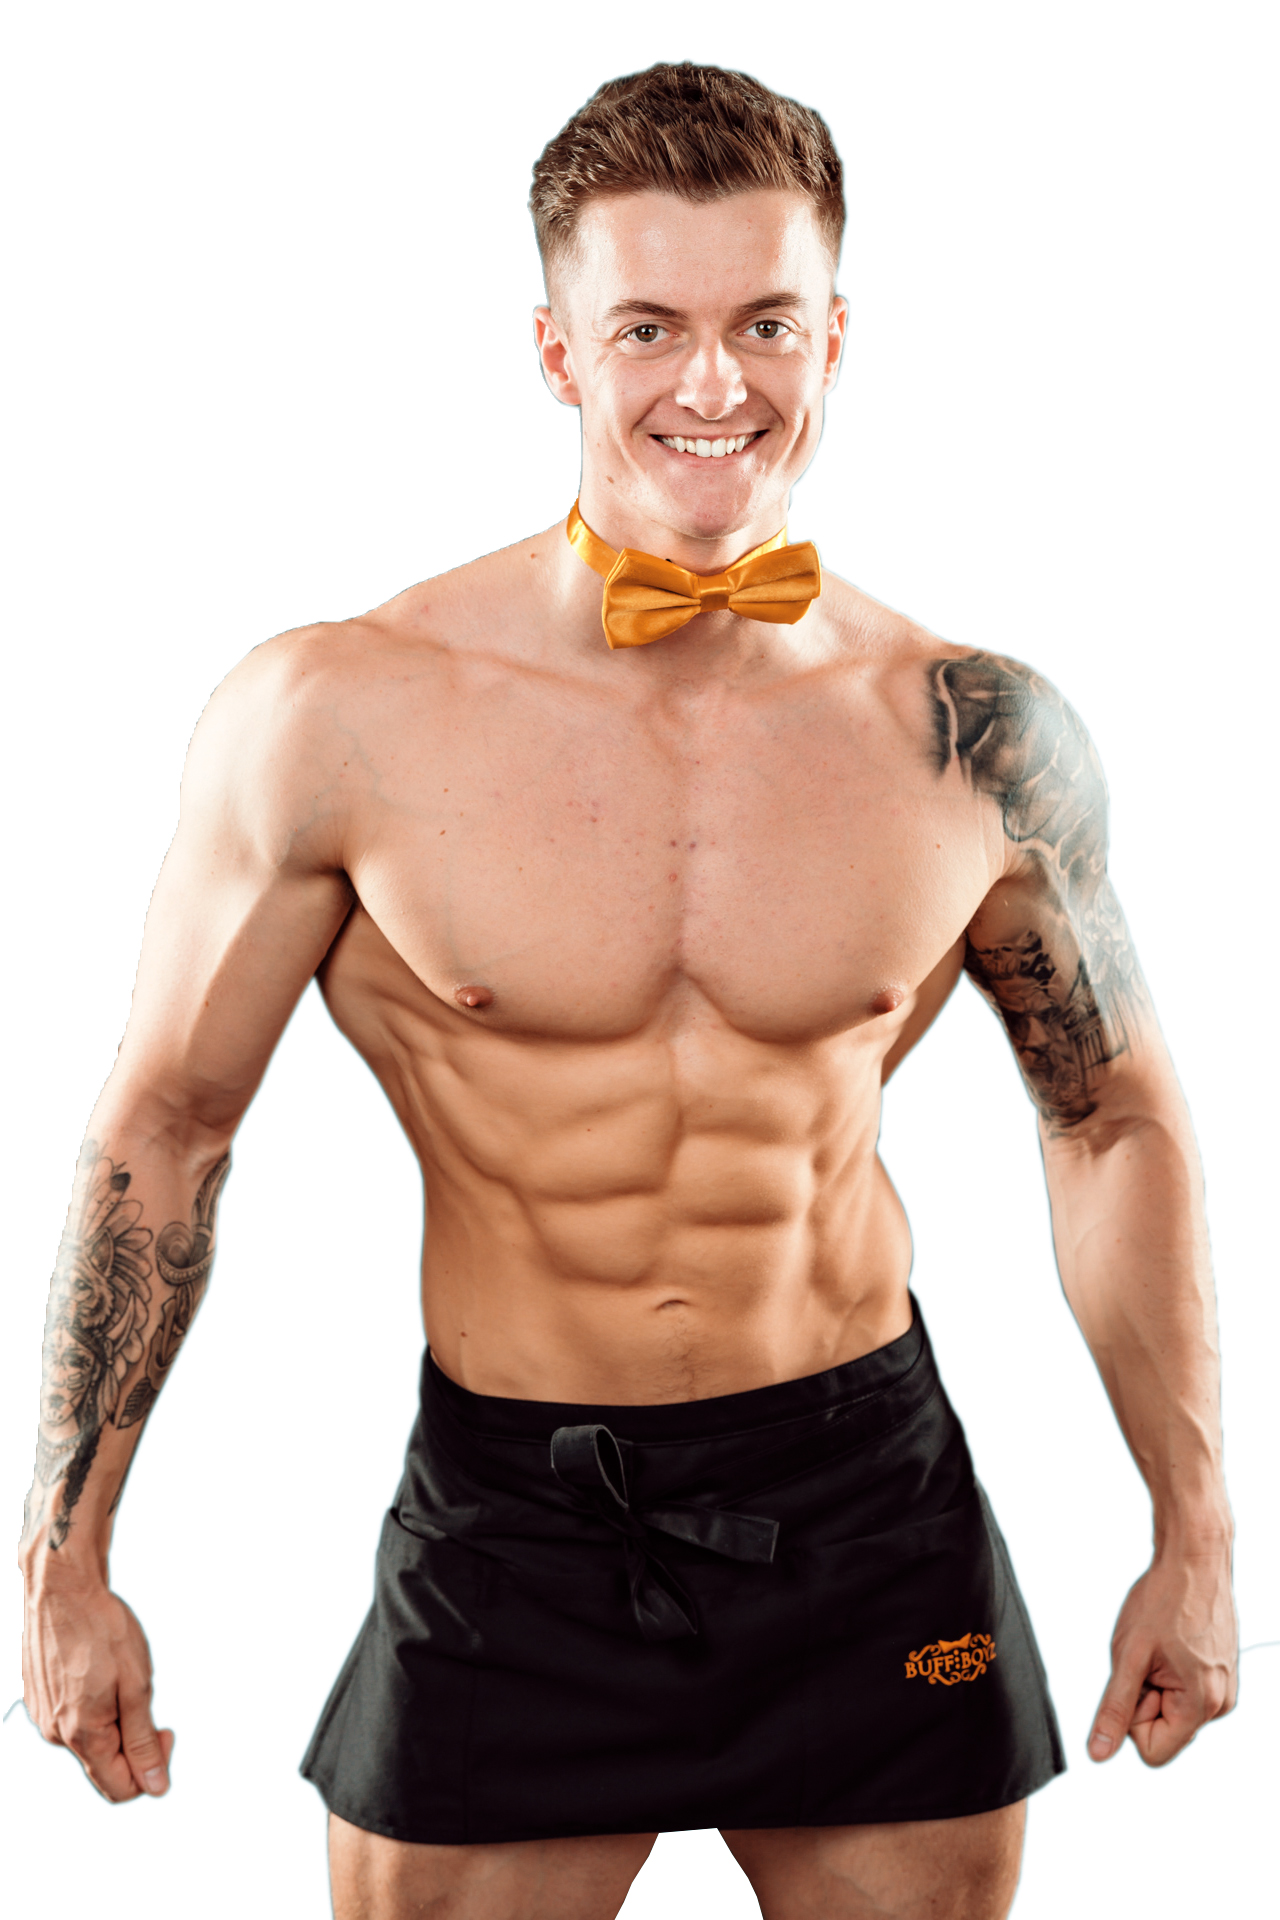 Considering a career change? Call for more ‘butlers in the buff’ as demand surges post-lockdown